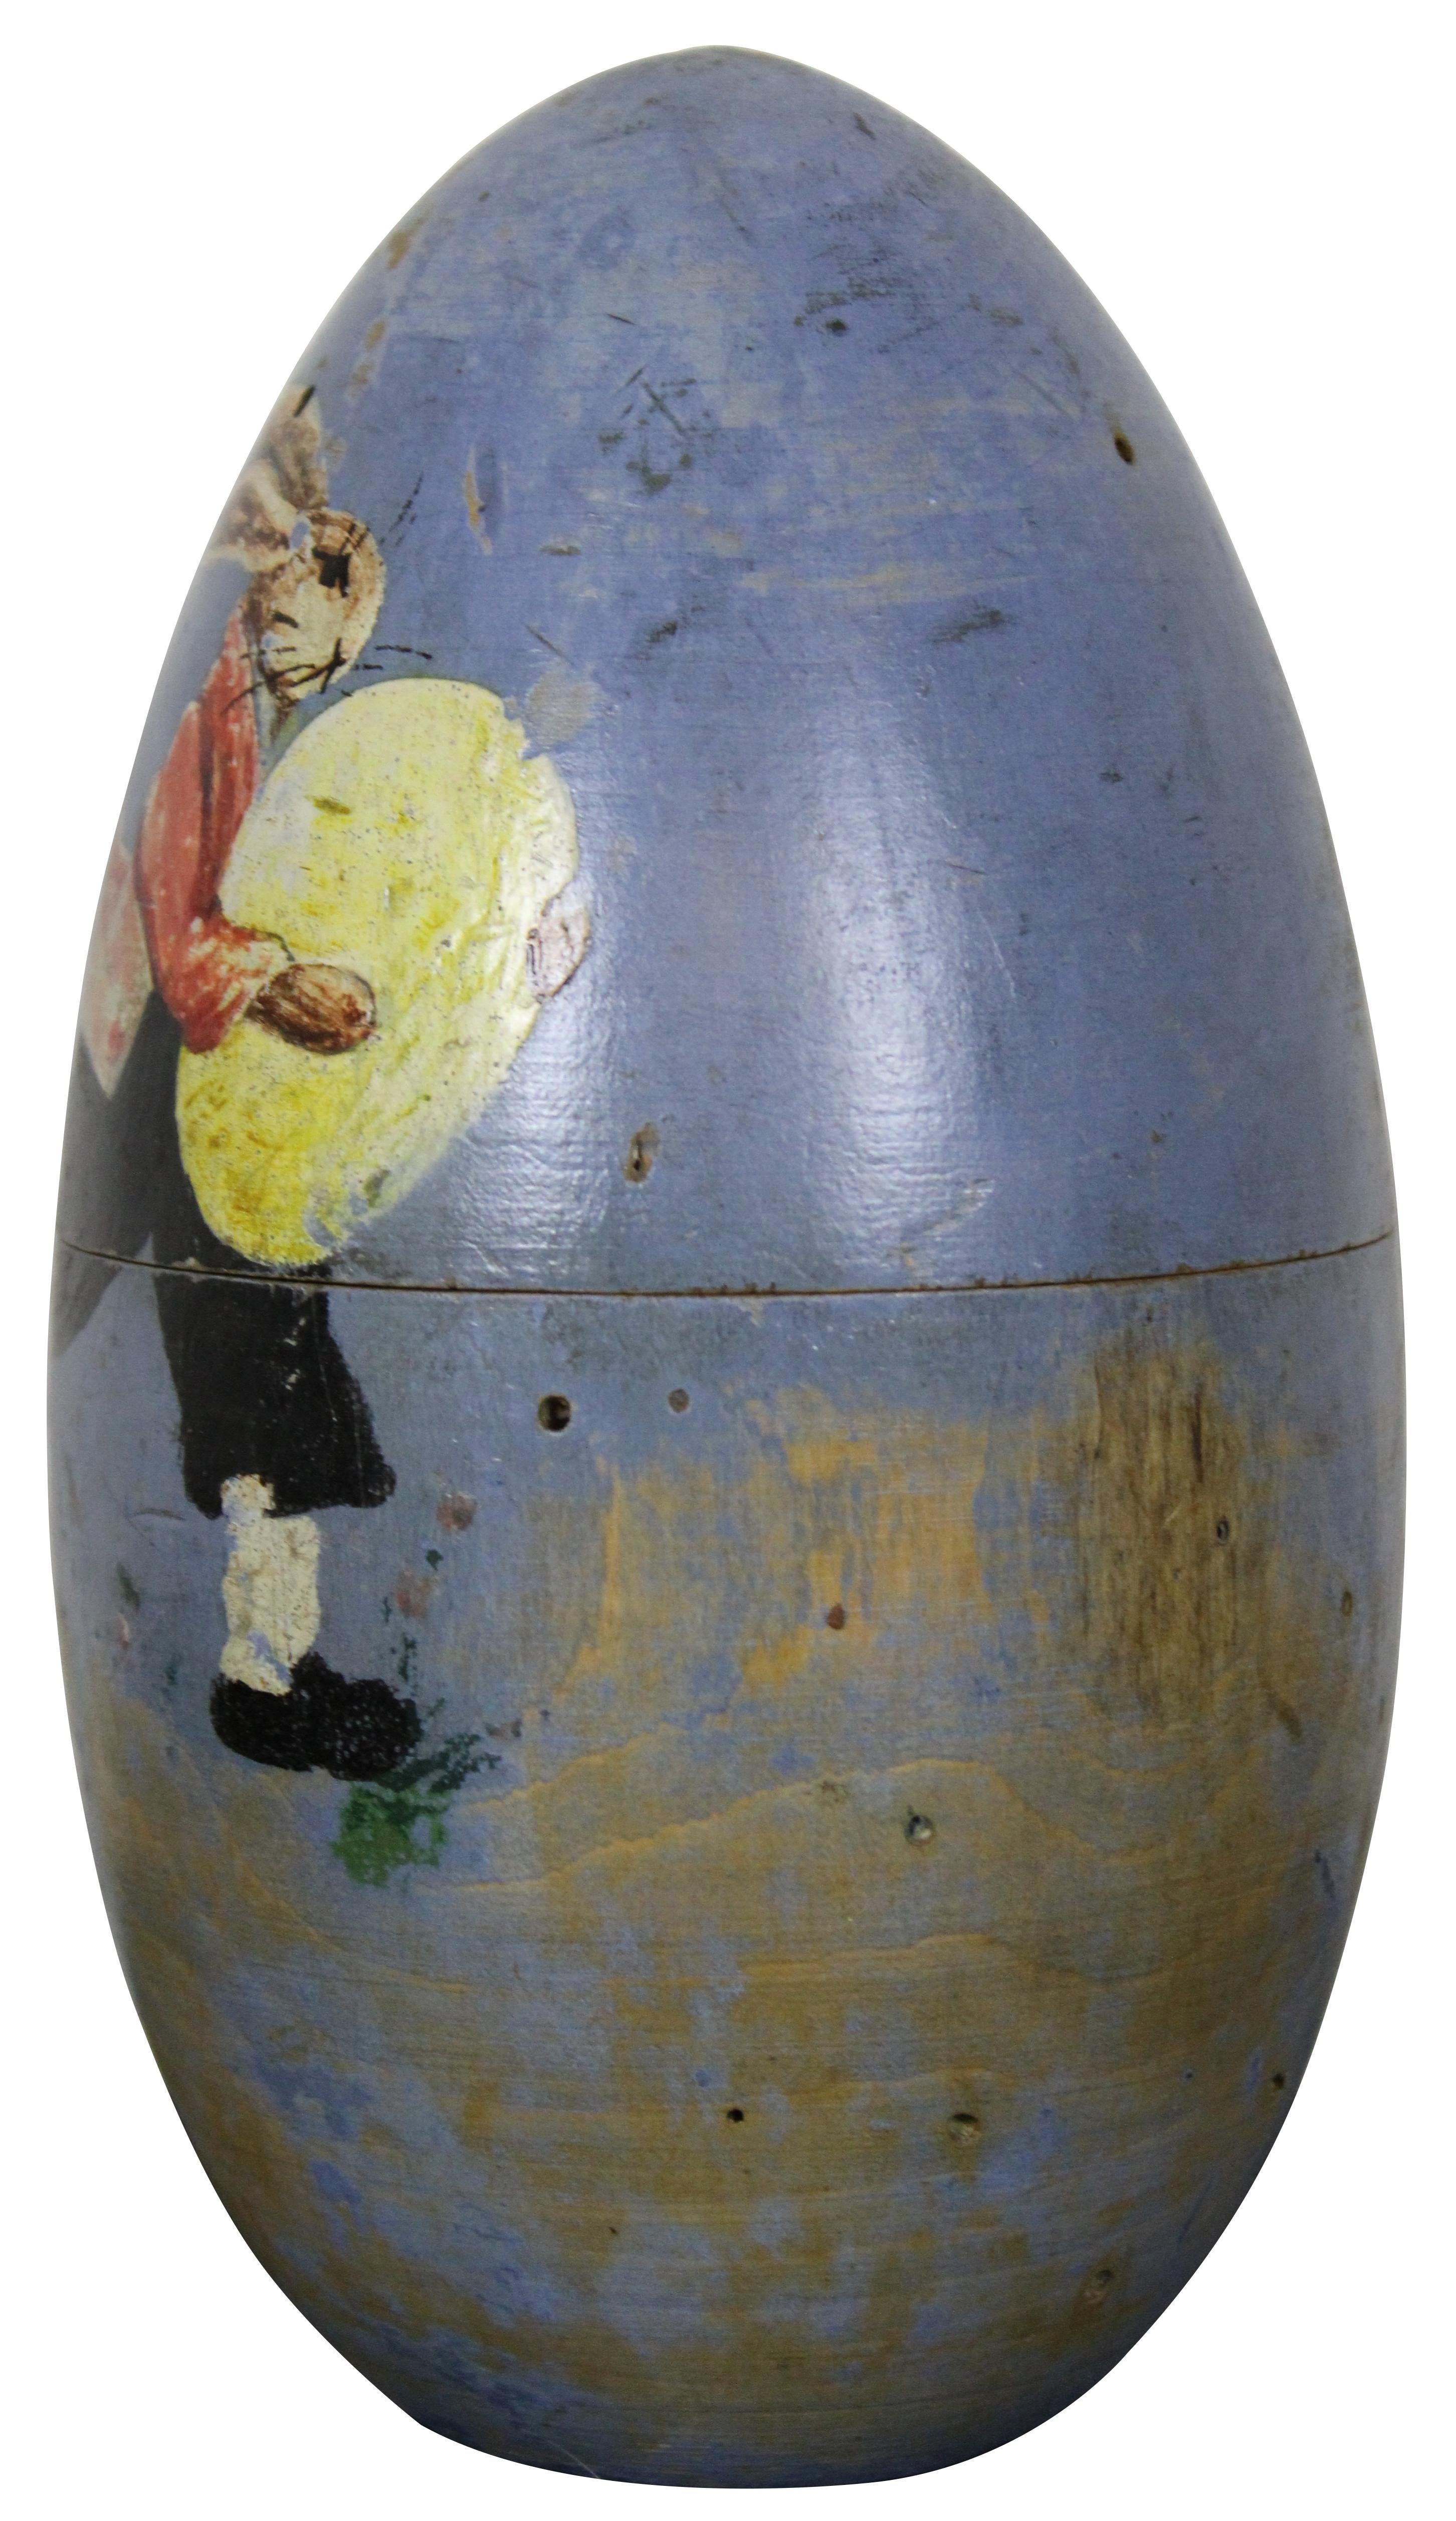 Vintage folk art style carved wooden egg shaped trinet box, painted blue with the image of an Easter Bunny running with a large yellow egg. Measure: 8